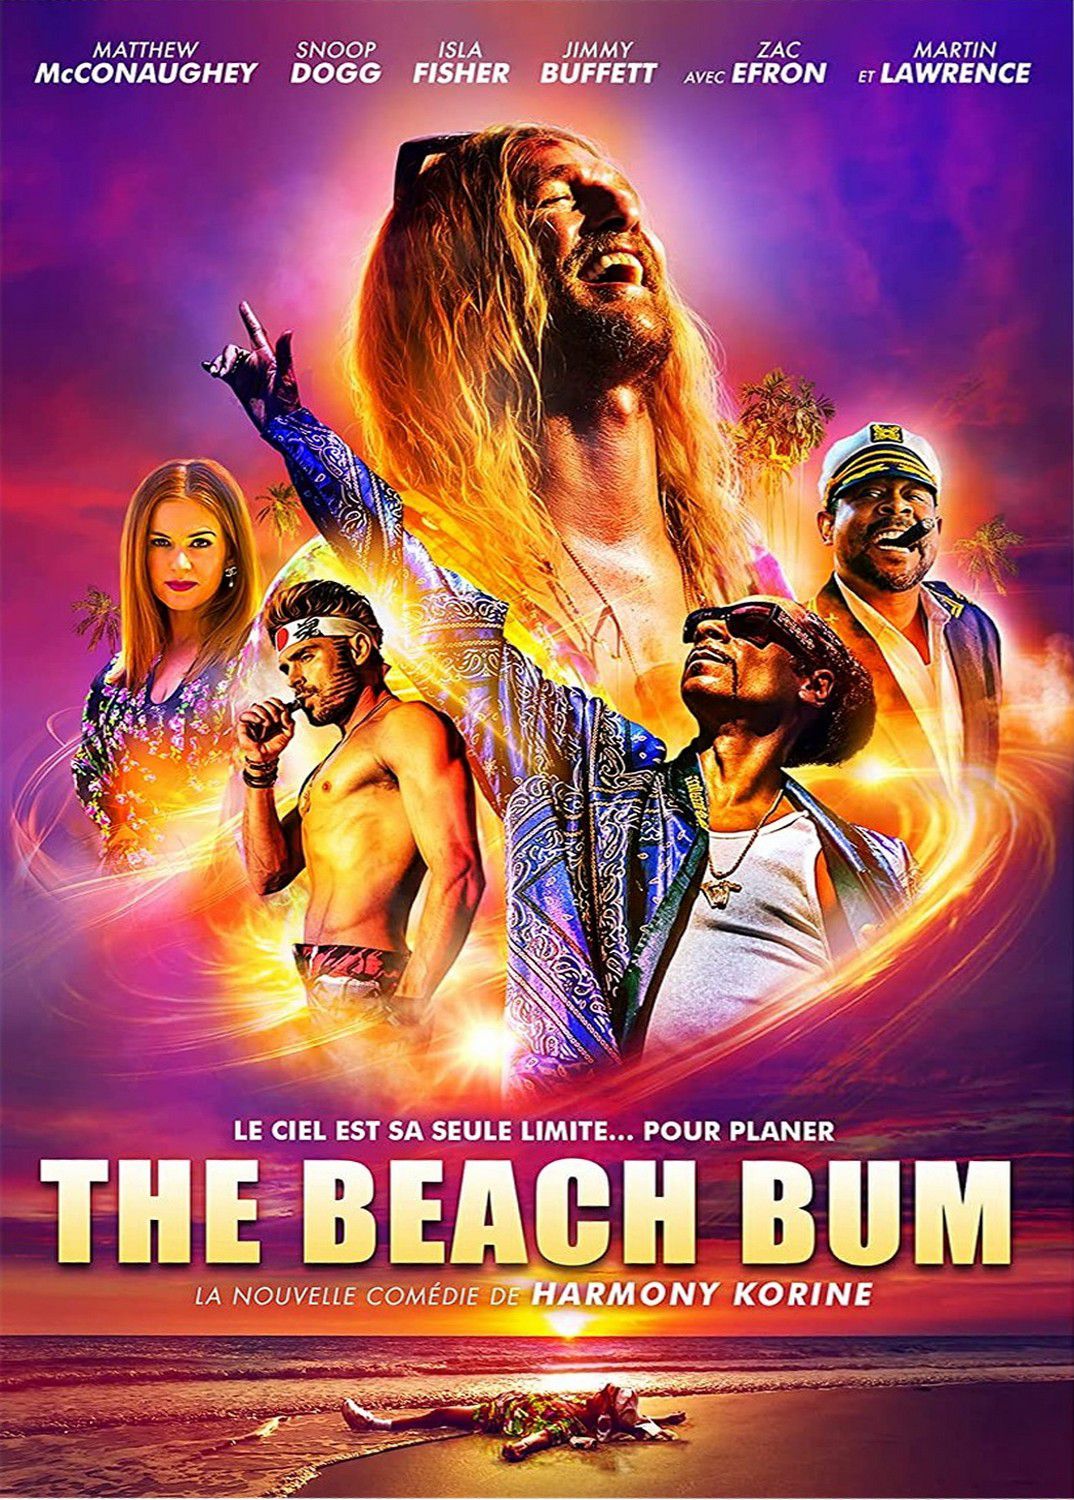 The Beach Bum - Film (2019) streaming VF gratuit complet